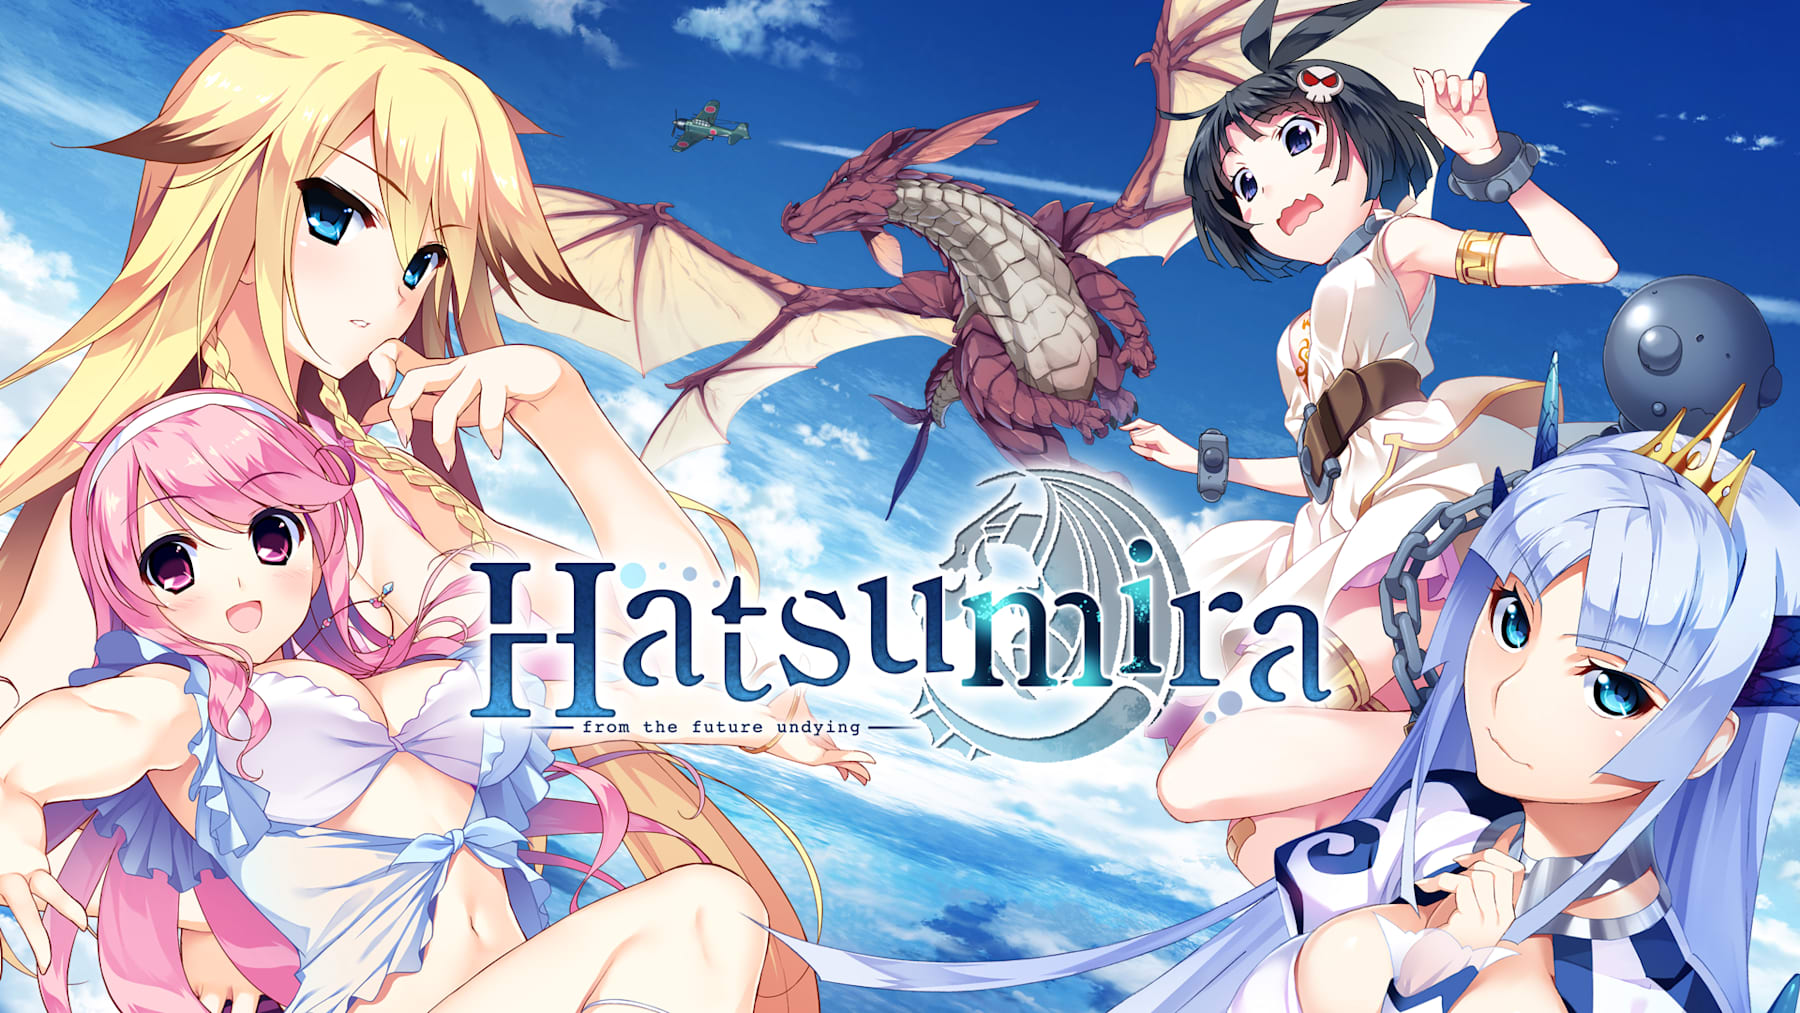 Hatsumira -From the Future Undying- 1